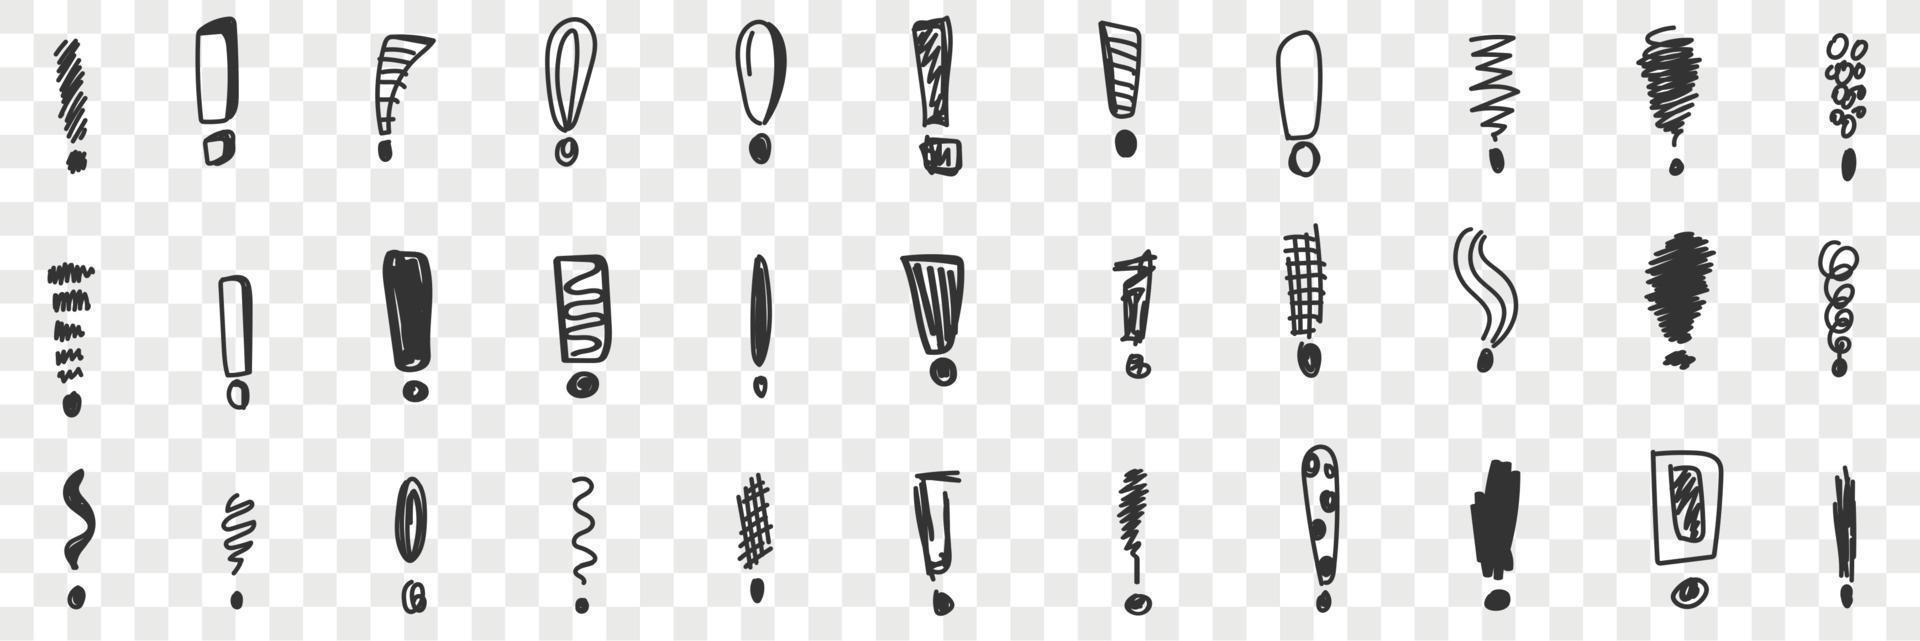 Exclamation mark symbols doodle set. Collection of hand drawn various shapes and styles of Exclamation mark symbols for attention attraction isolated on transparent background vector